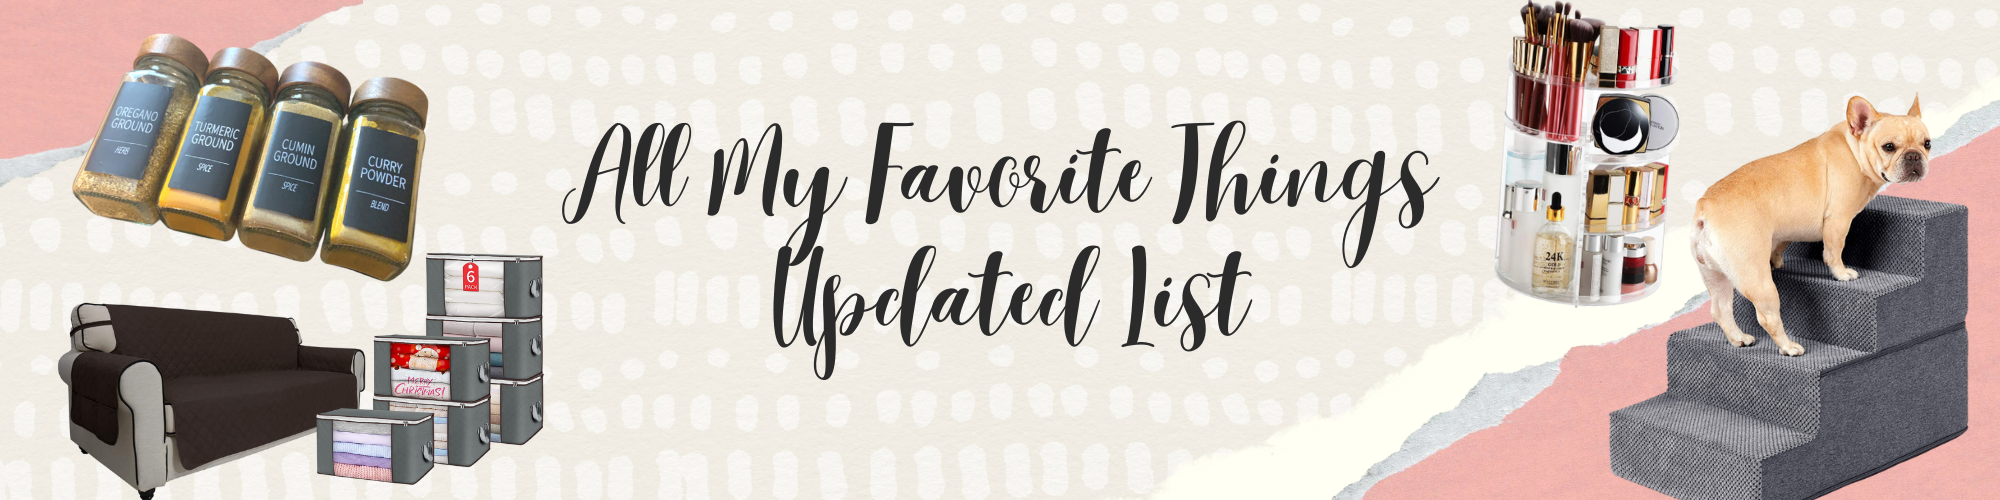 all my favorite things updated list shop Thanksgiving deals shop local discounts amazon finds cyber monday